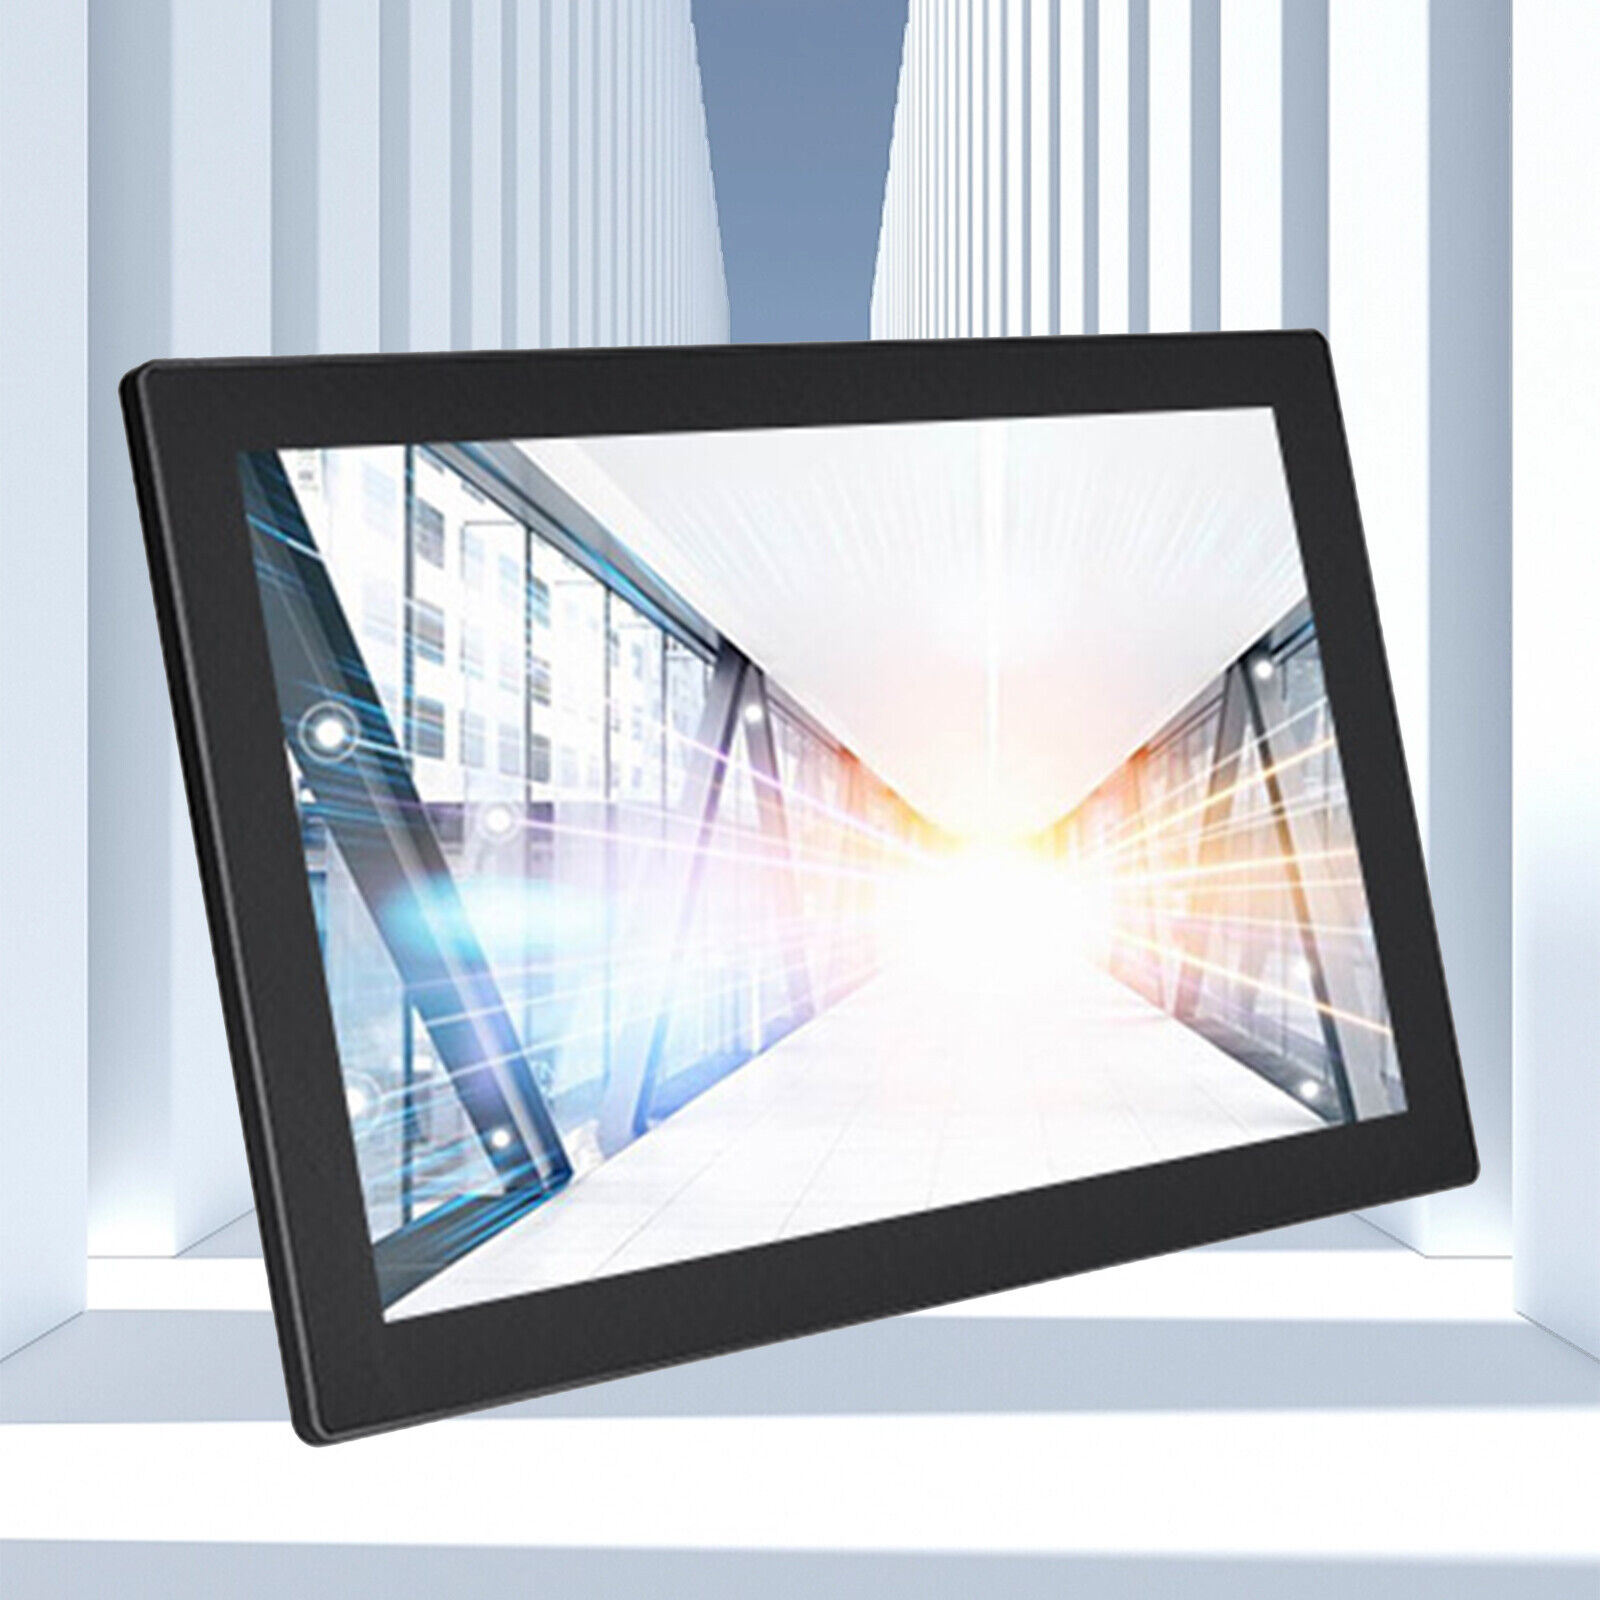 21.5 In Industrial Large Android Tablet Waterproof Tablets PC Wall Mount Wifi US